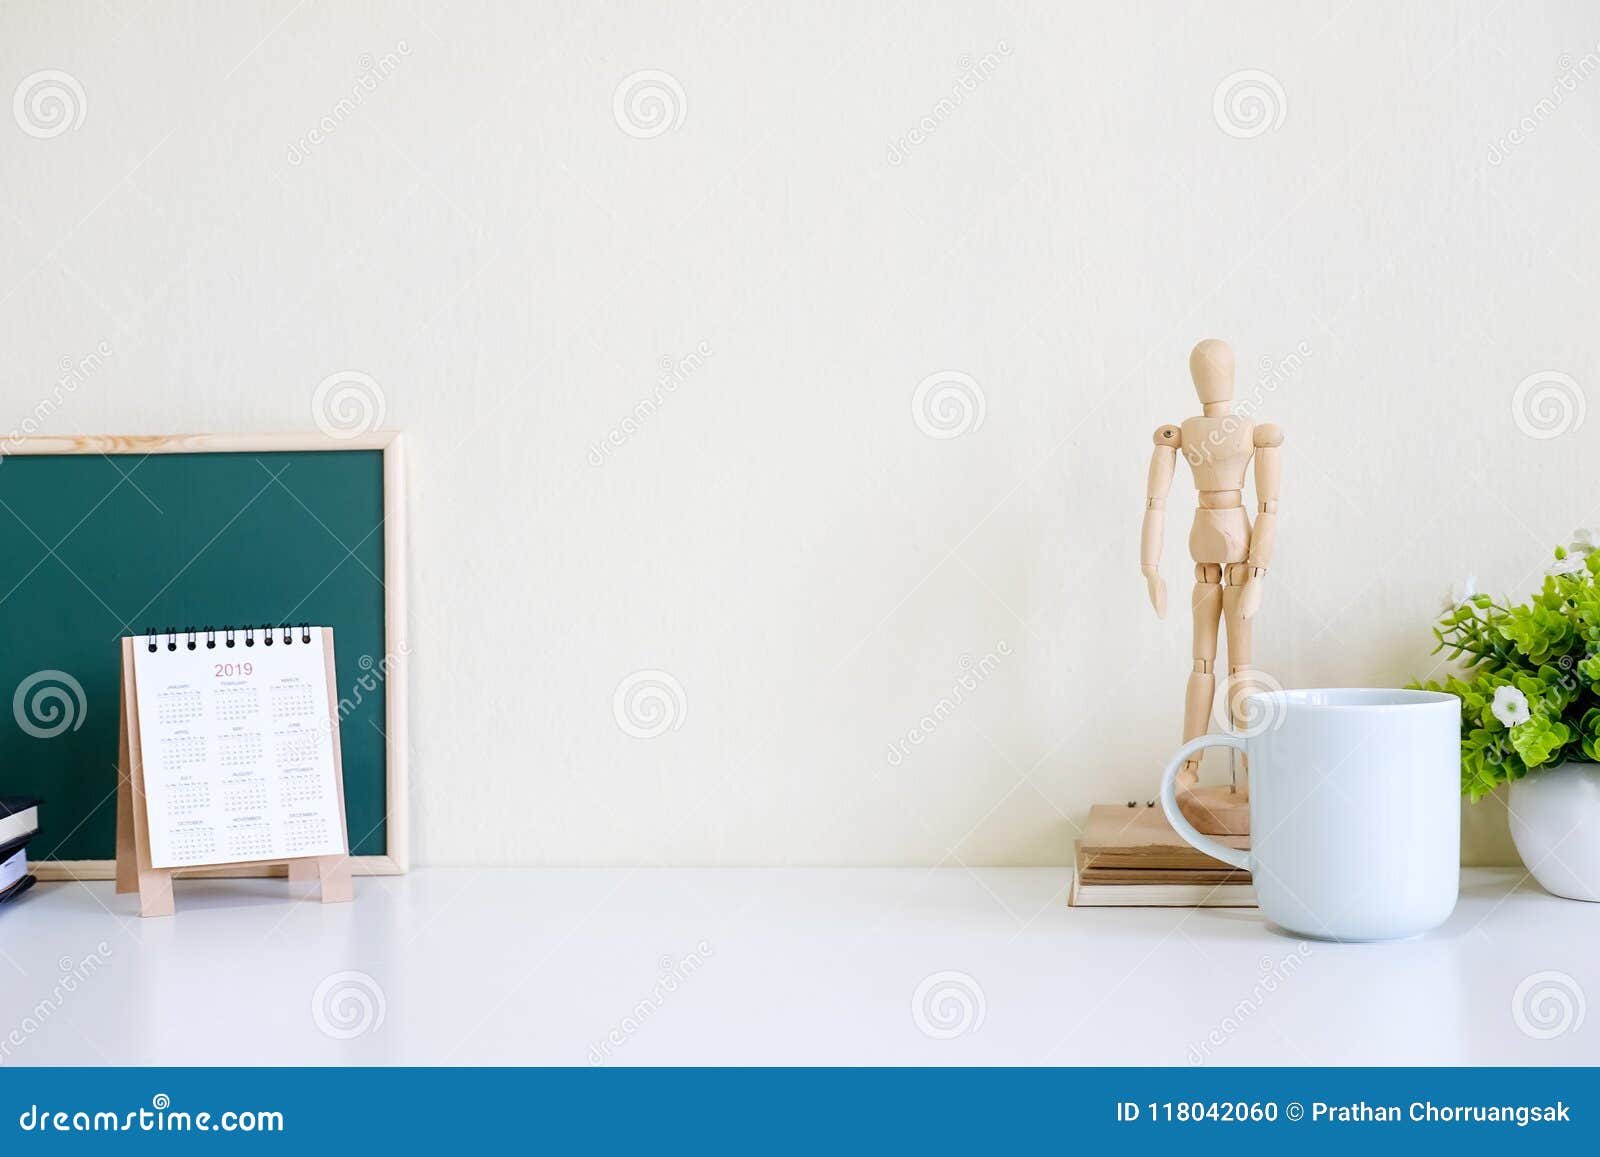 Workspace Mock Up with Wooden Model Toy, Cup of Coffee. Stock Photo ...